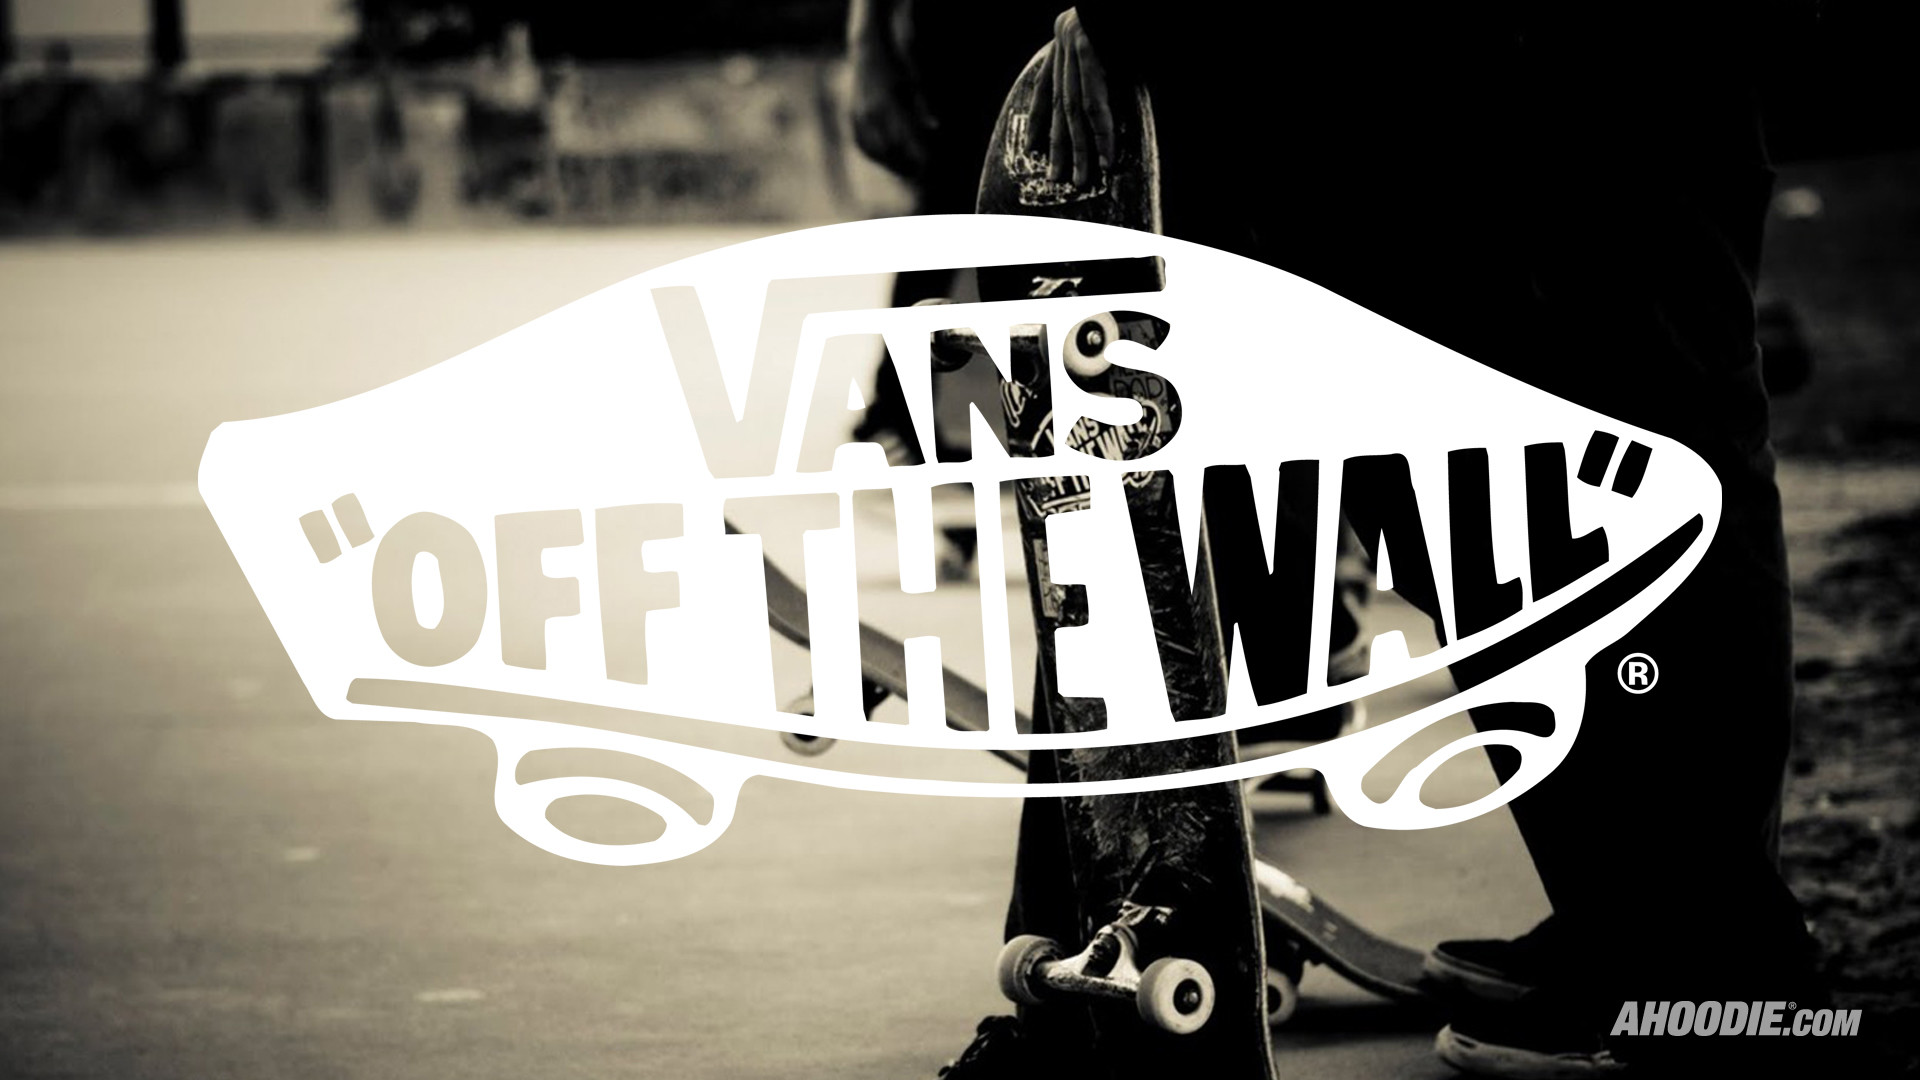 Live Skate Wallpapers | Skate Wallpapers Collection